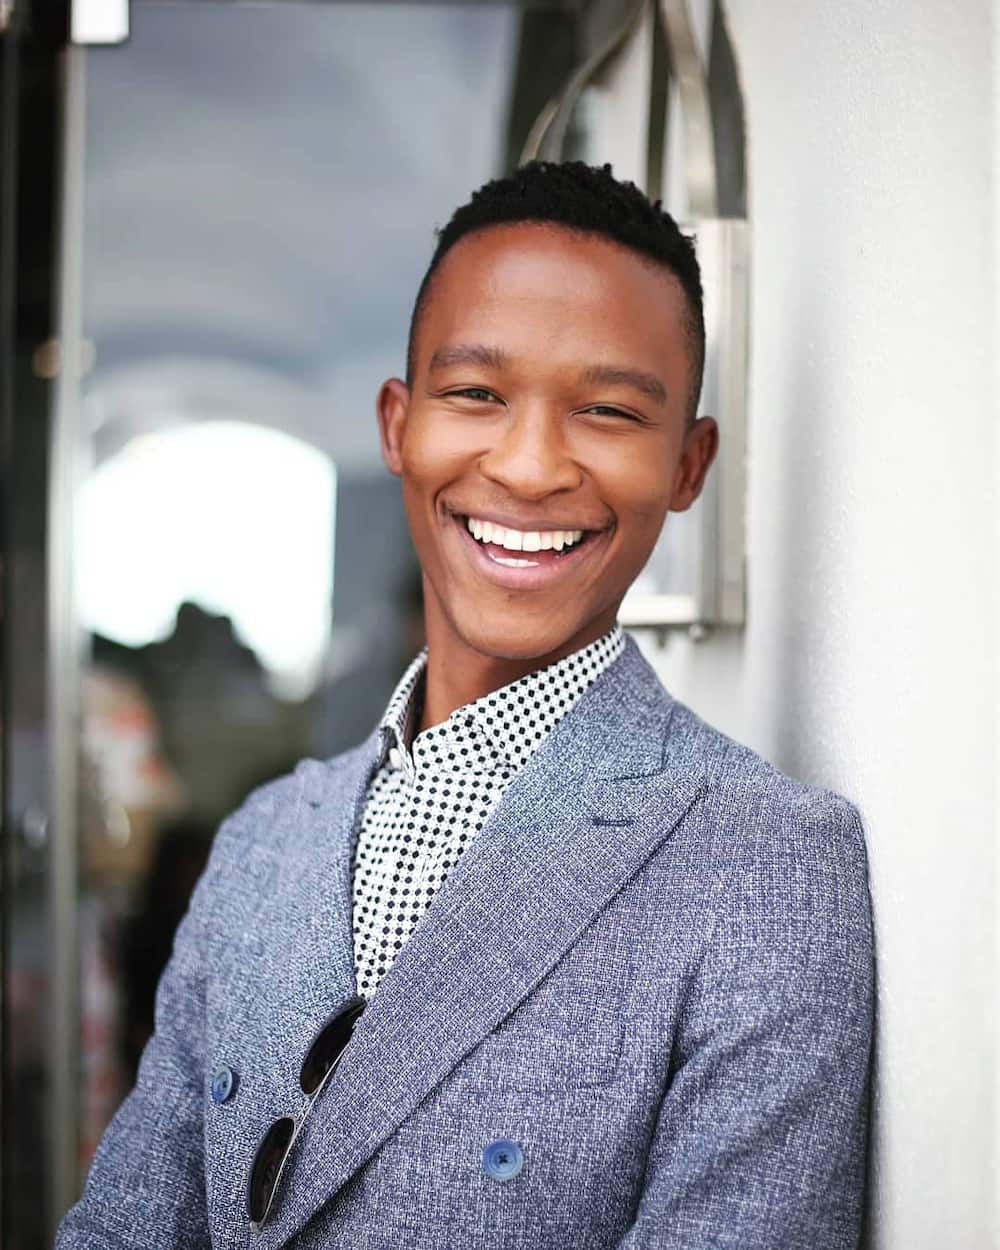 Katlego Maboe biography: age, children, wife, TV shows, nominations, awards and Instagram